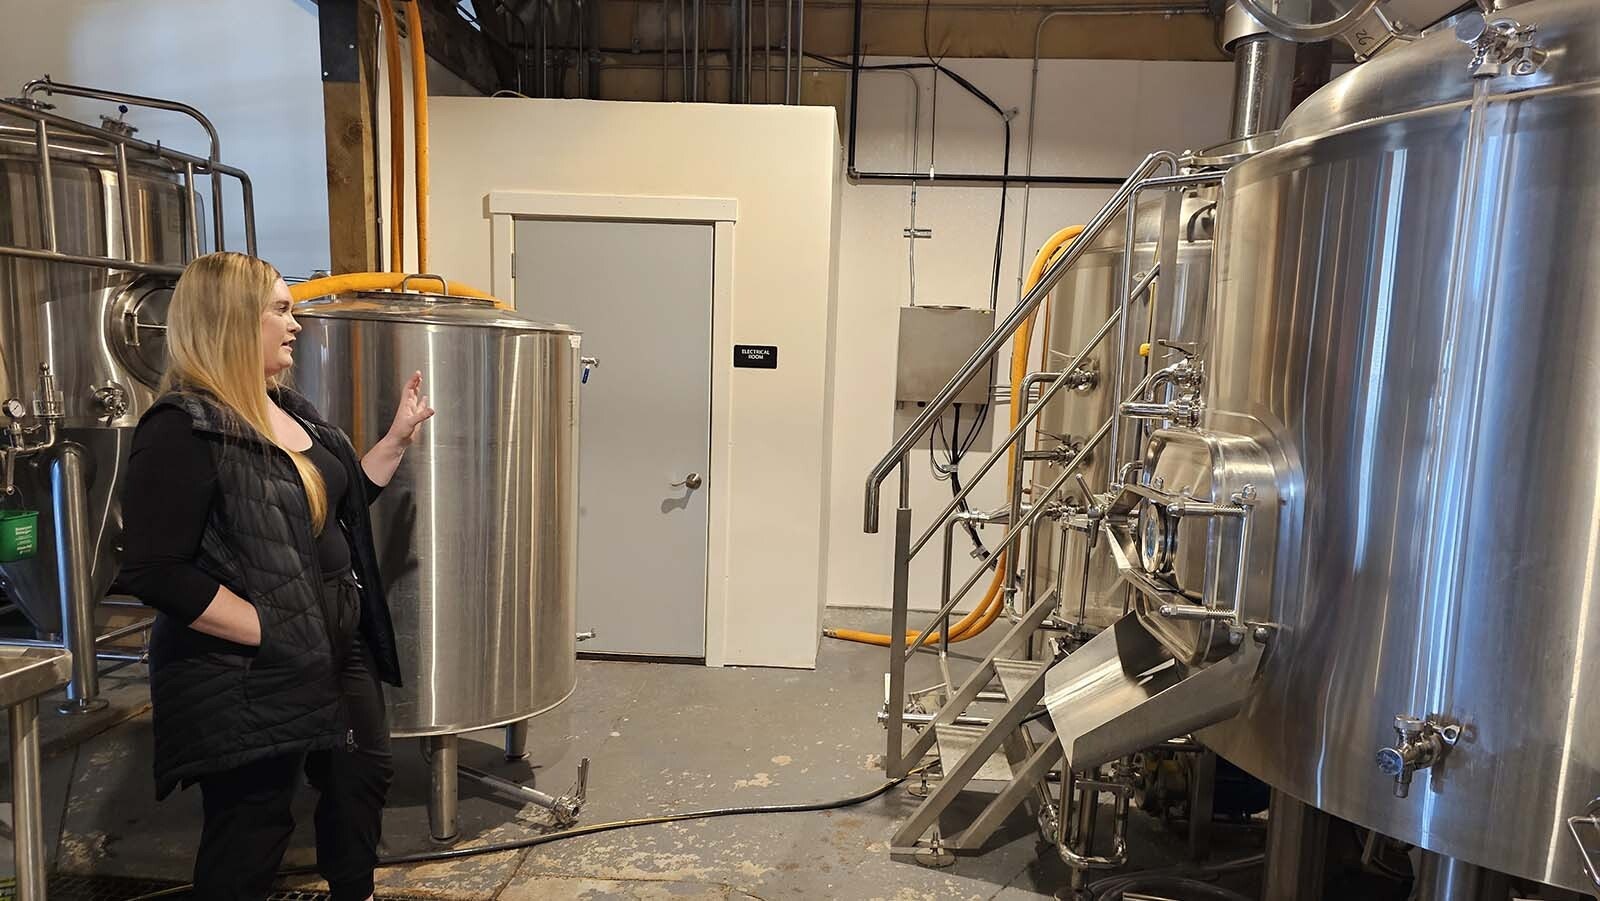 Brennan Westby describes how her brewery system arrived in "a million little pieces" with absolutely no instructions or numbering system to guide her in assembling it. That was stressful, but with help from Wyoming's friendly master brewer community, the system is all put together now, and Brennan knows her system backwards and forward.